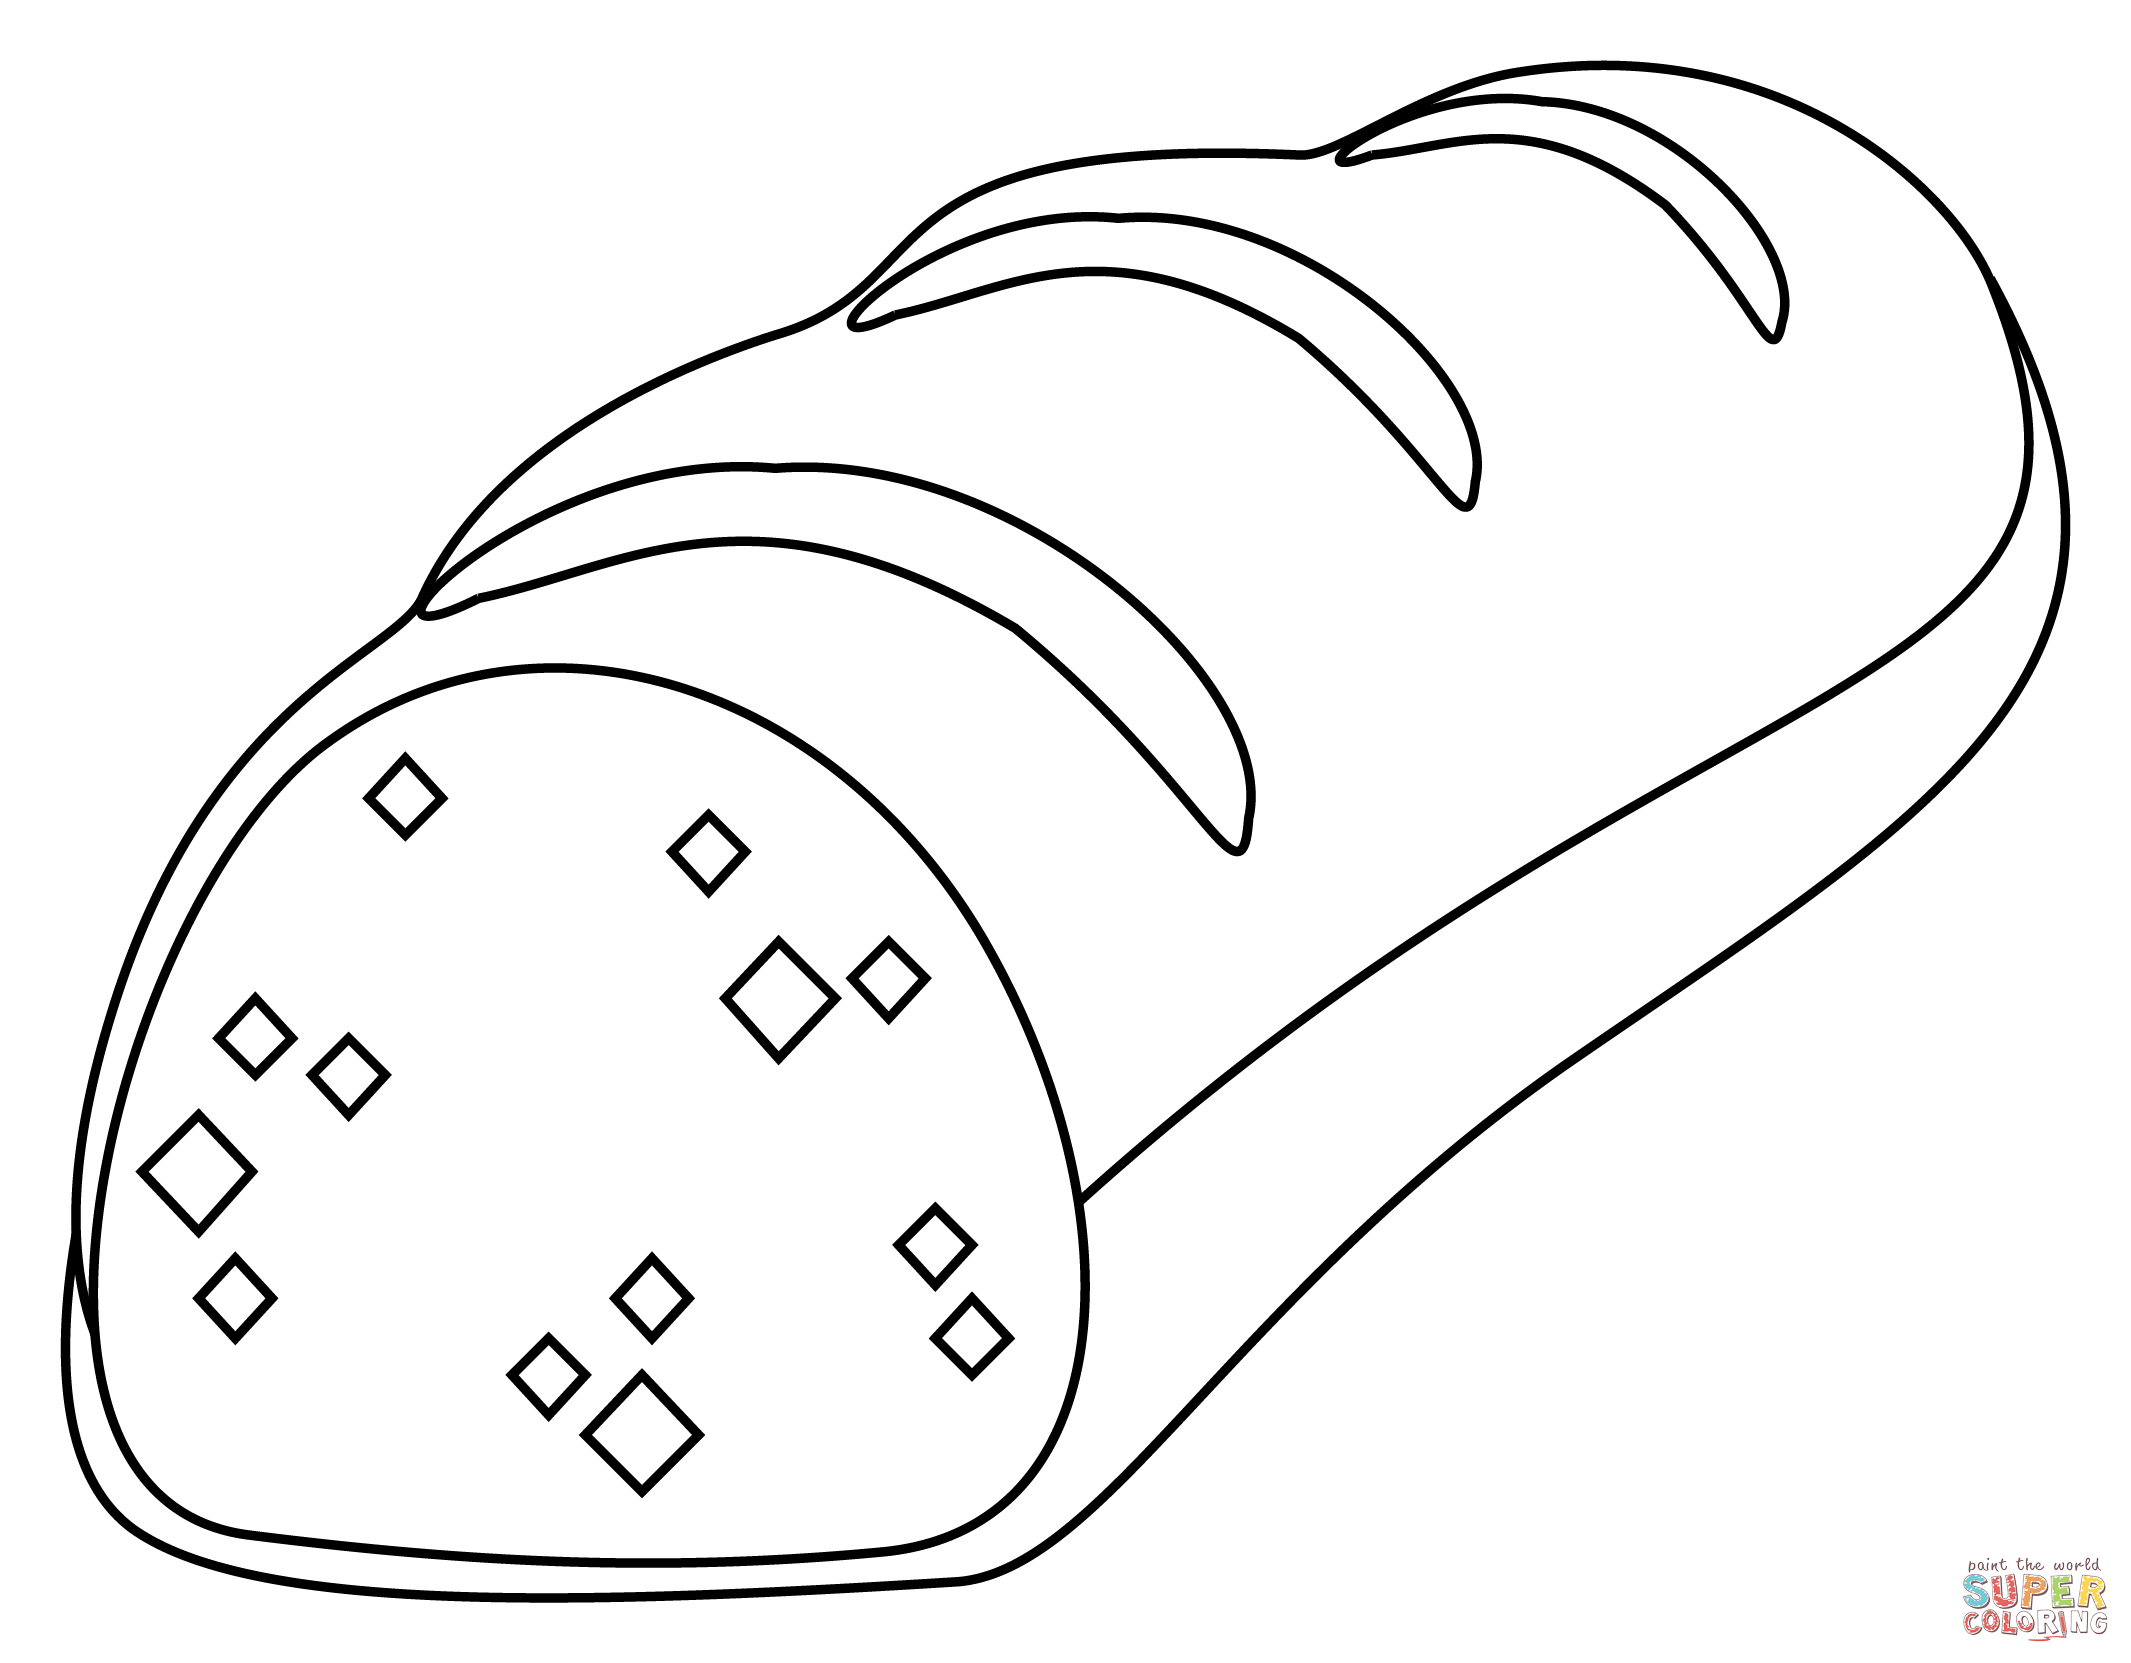 Baguette Bread coloring page | Free Printable Coloring Pages